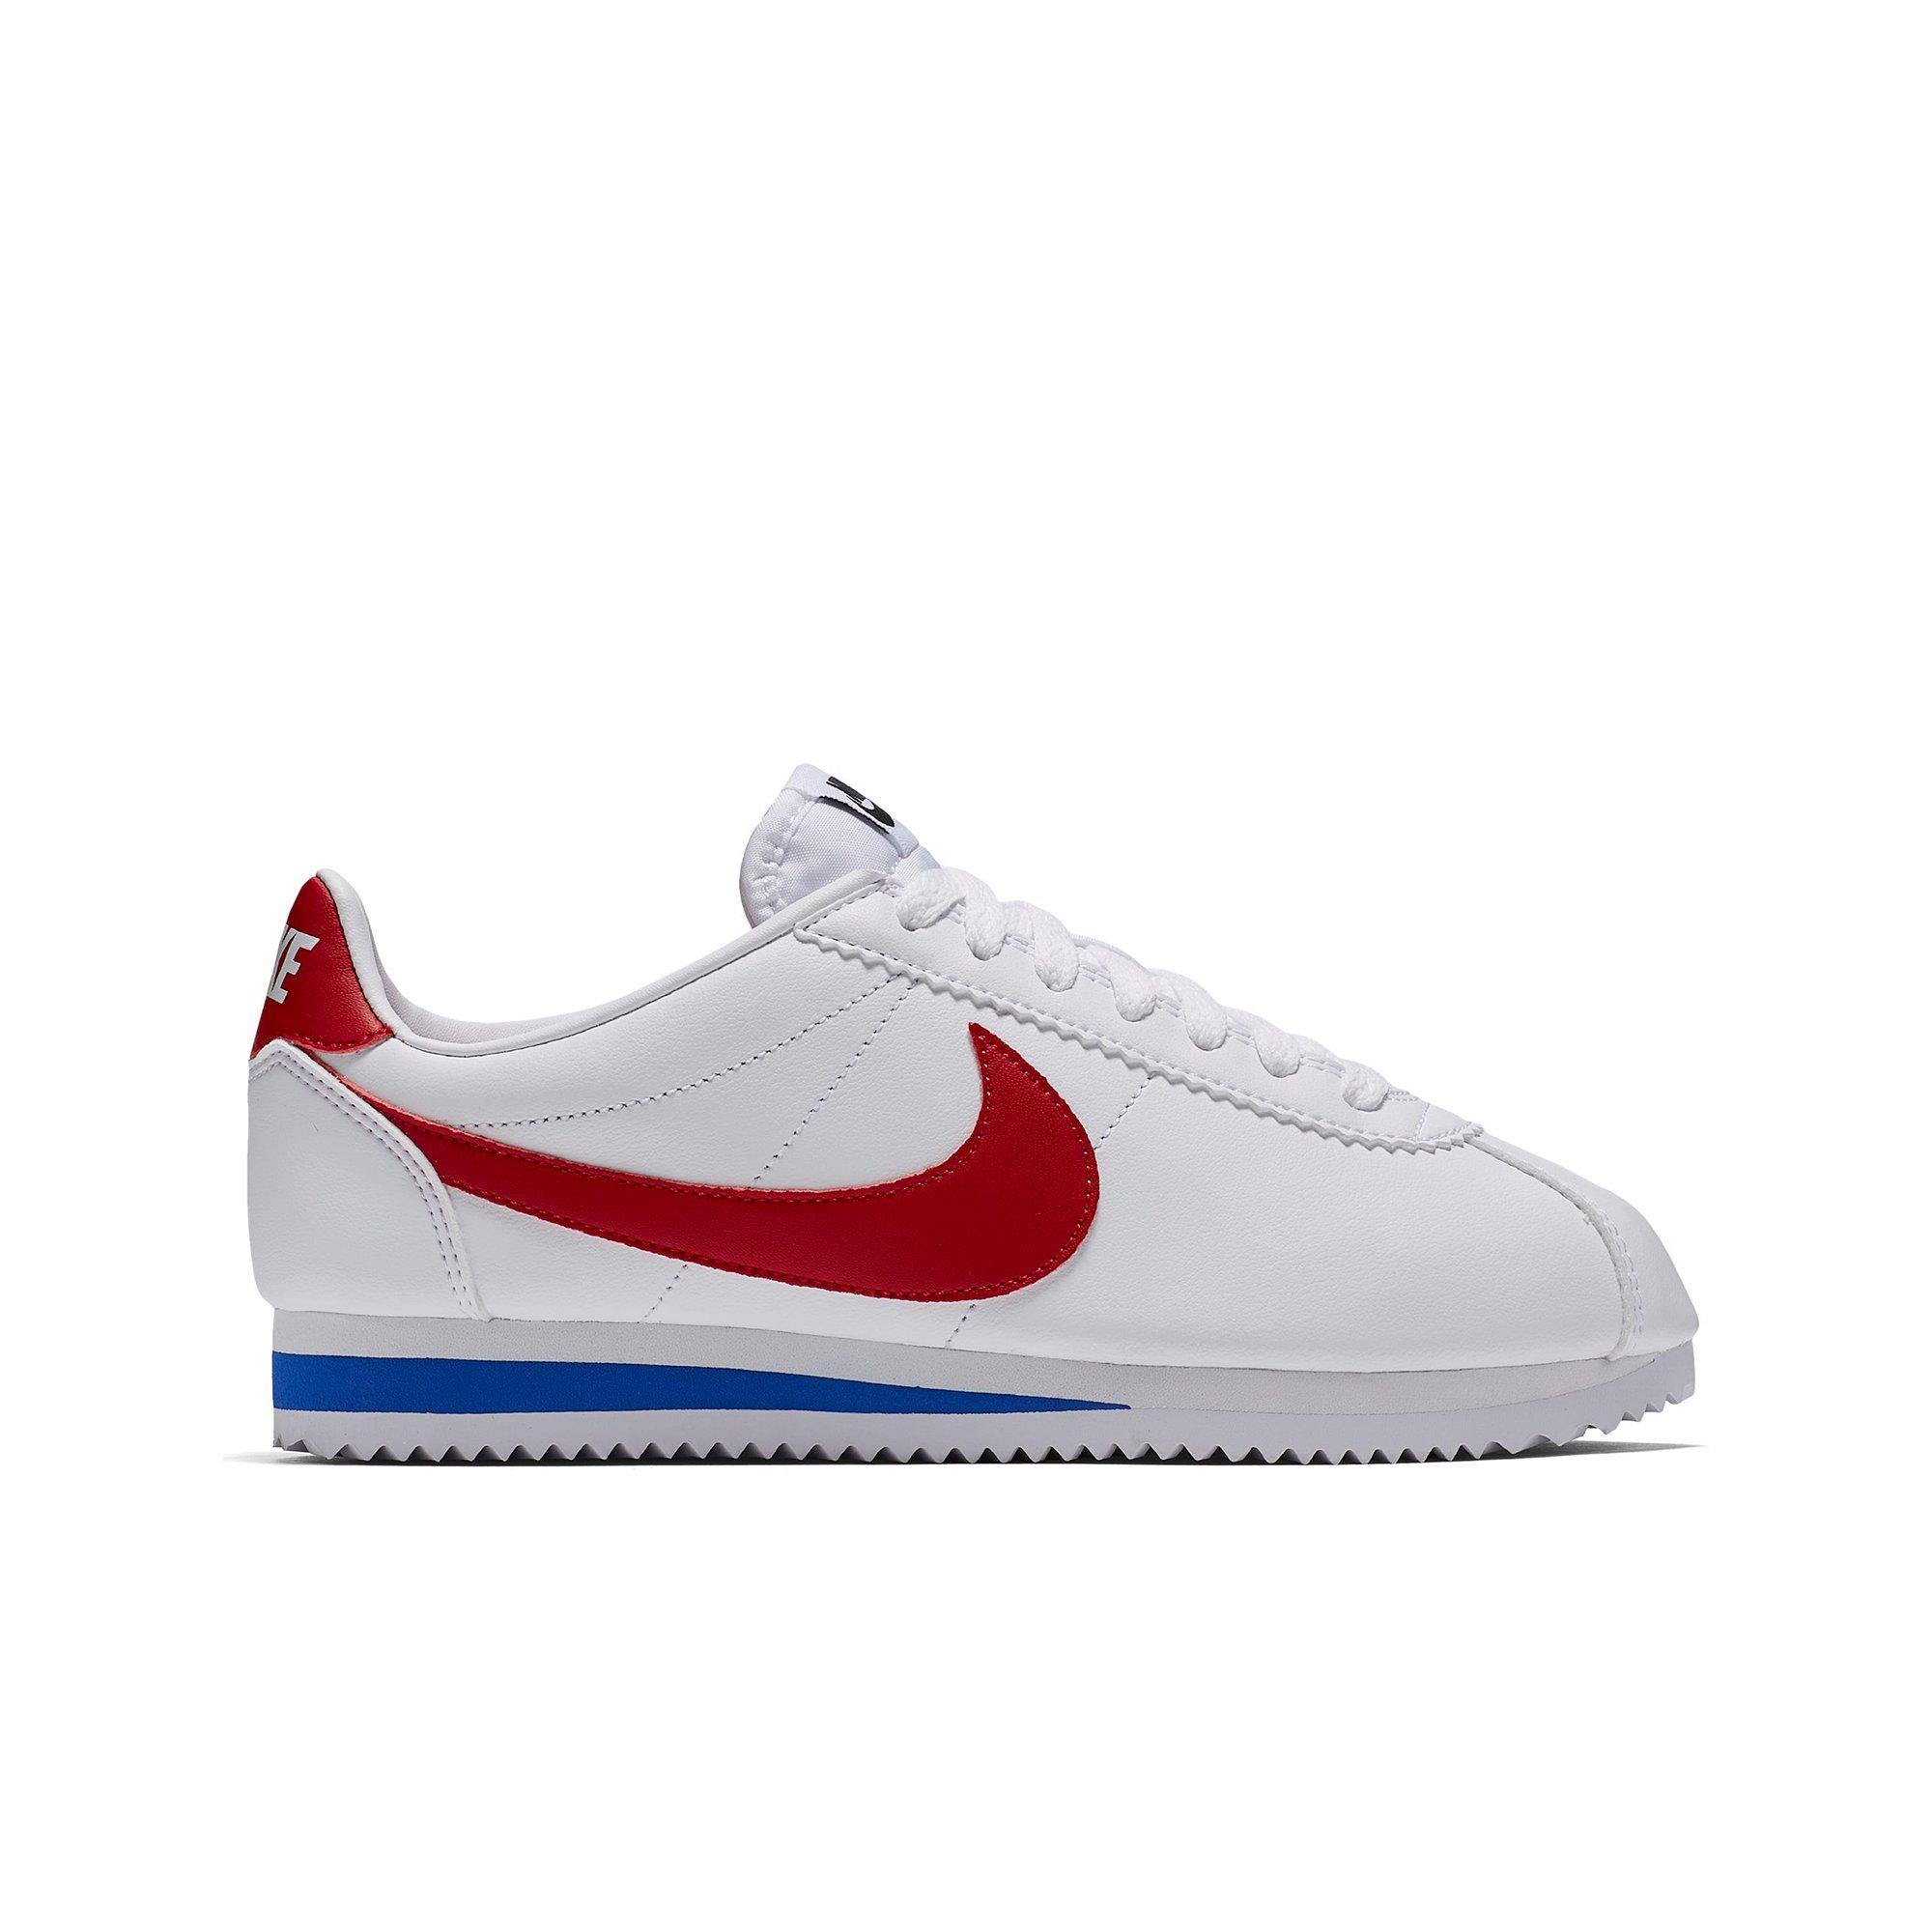 nike classic cortez womens red white and blue